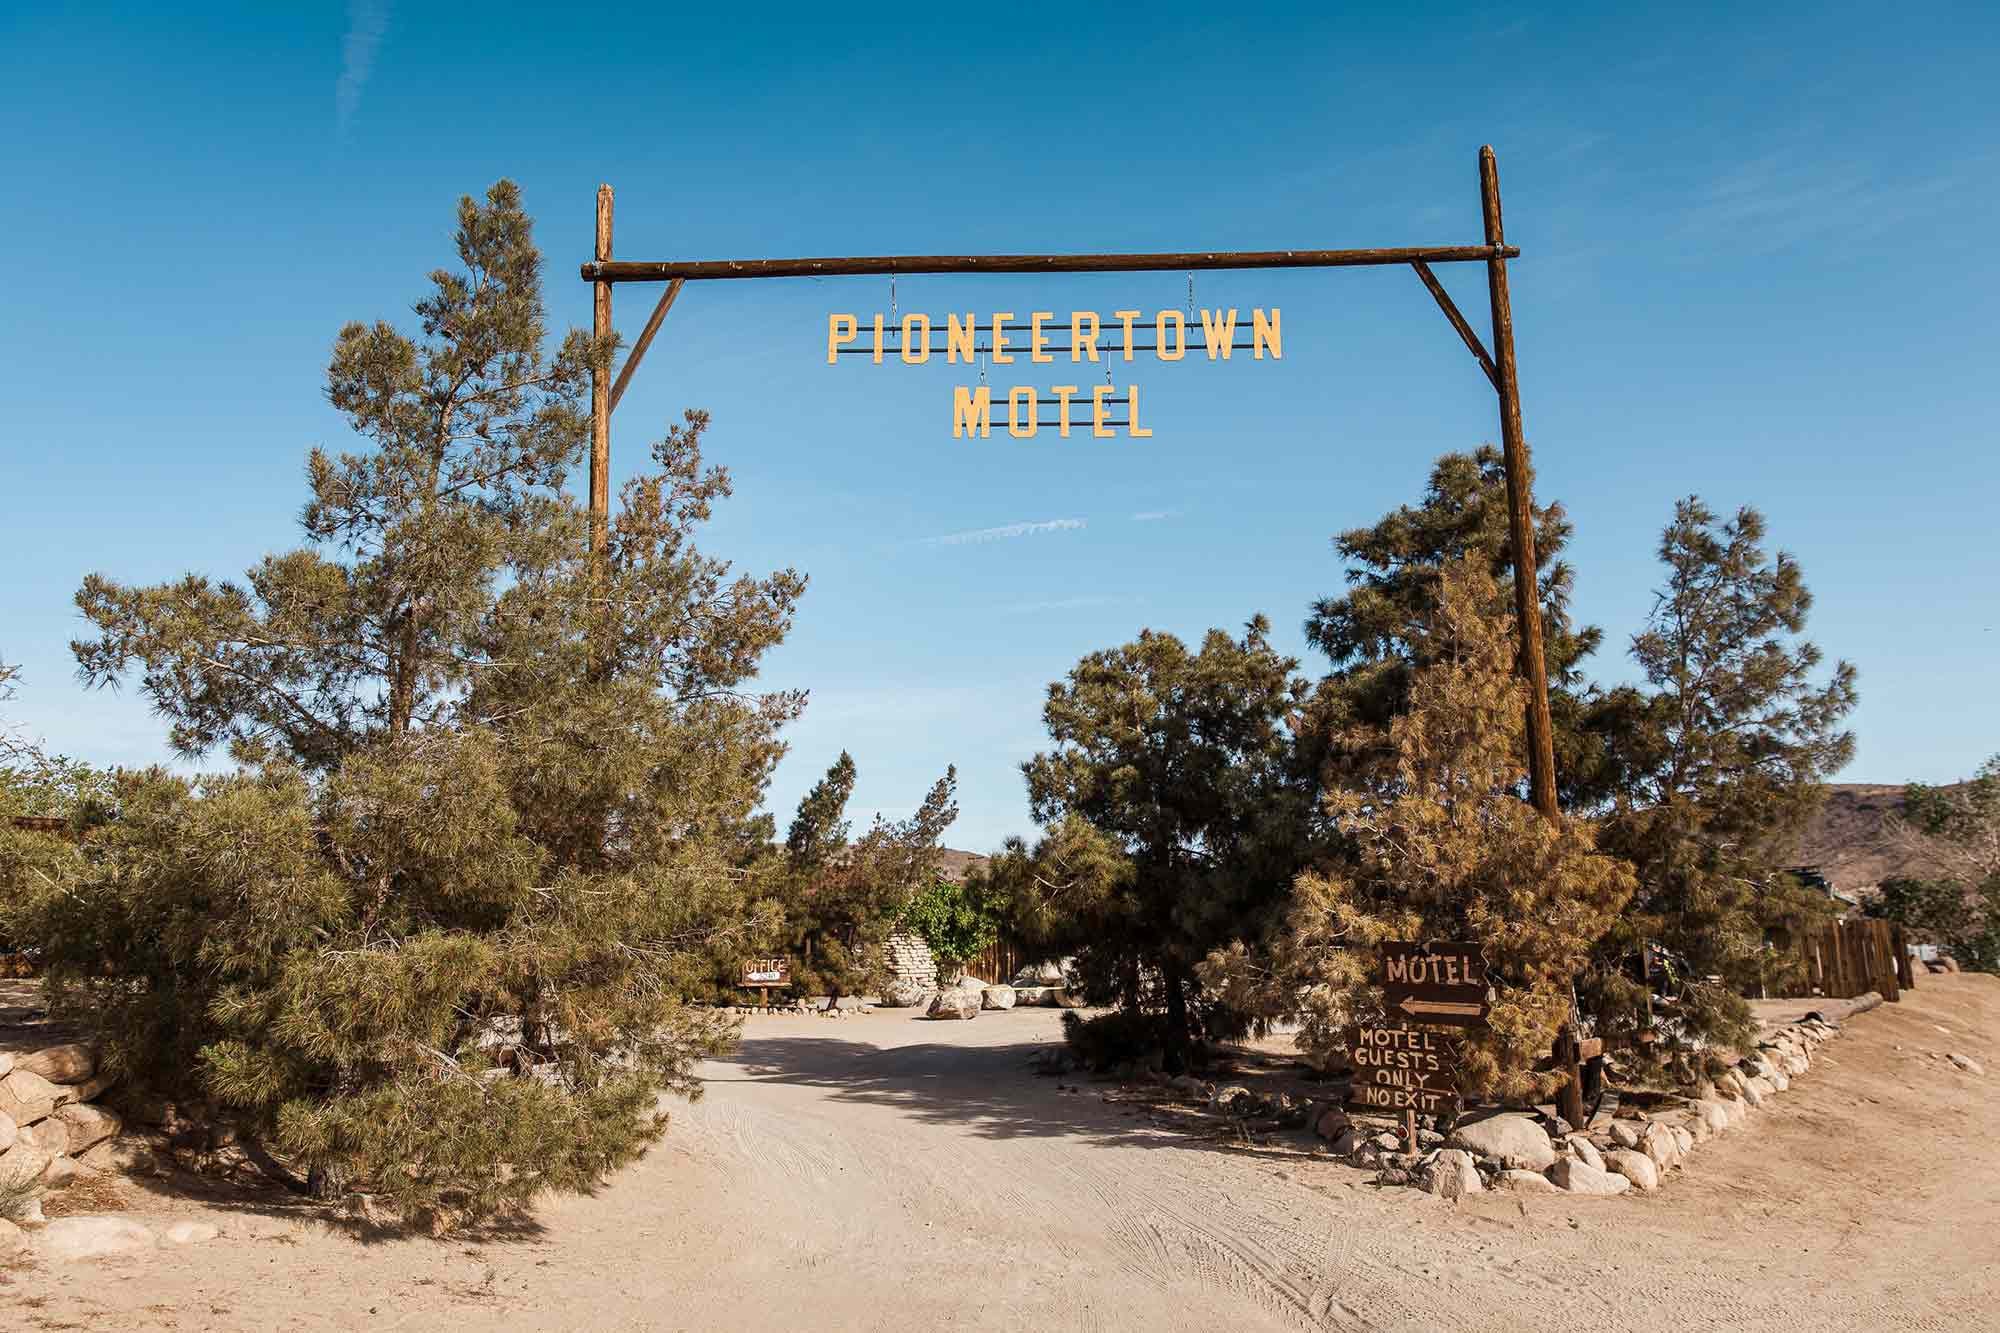 The entire grounds of the Pioneertown Motel were rented out for the Aether Rally.